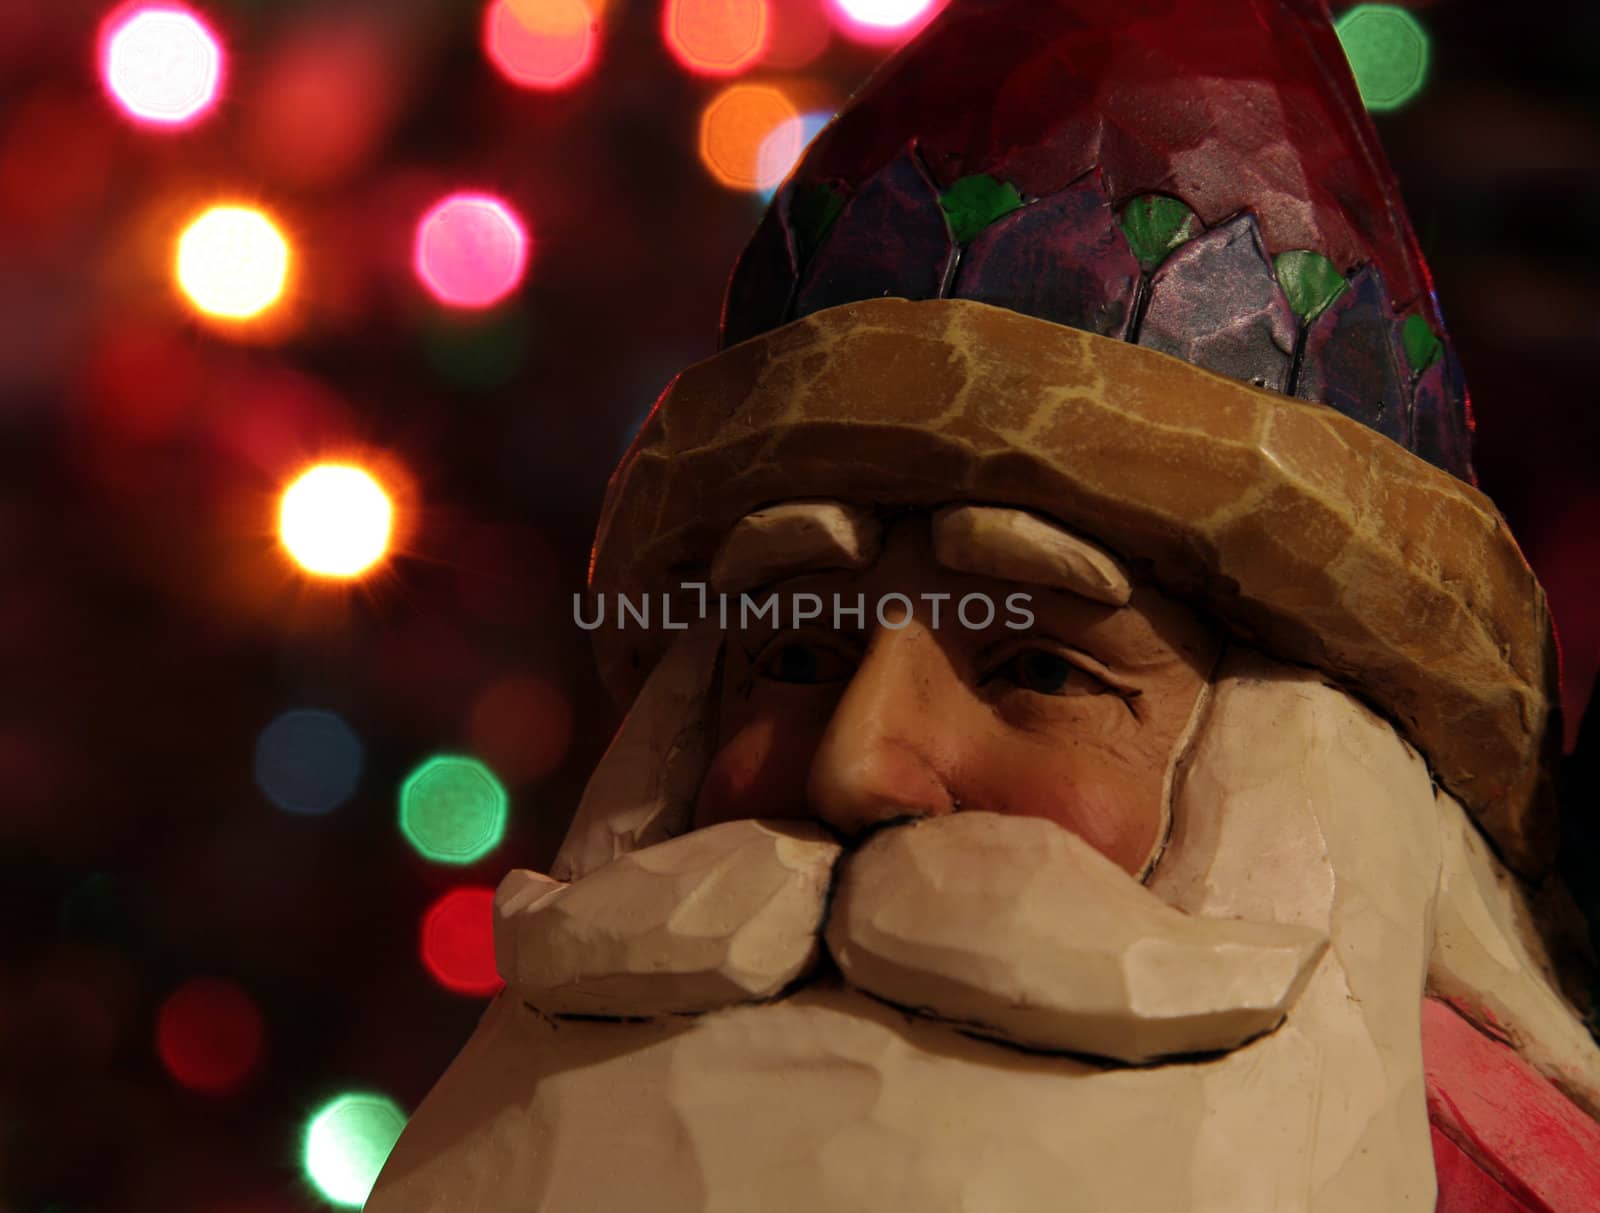 A santa claus figurine with Christmas lights in the background.
